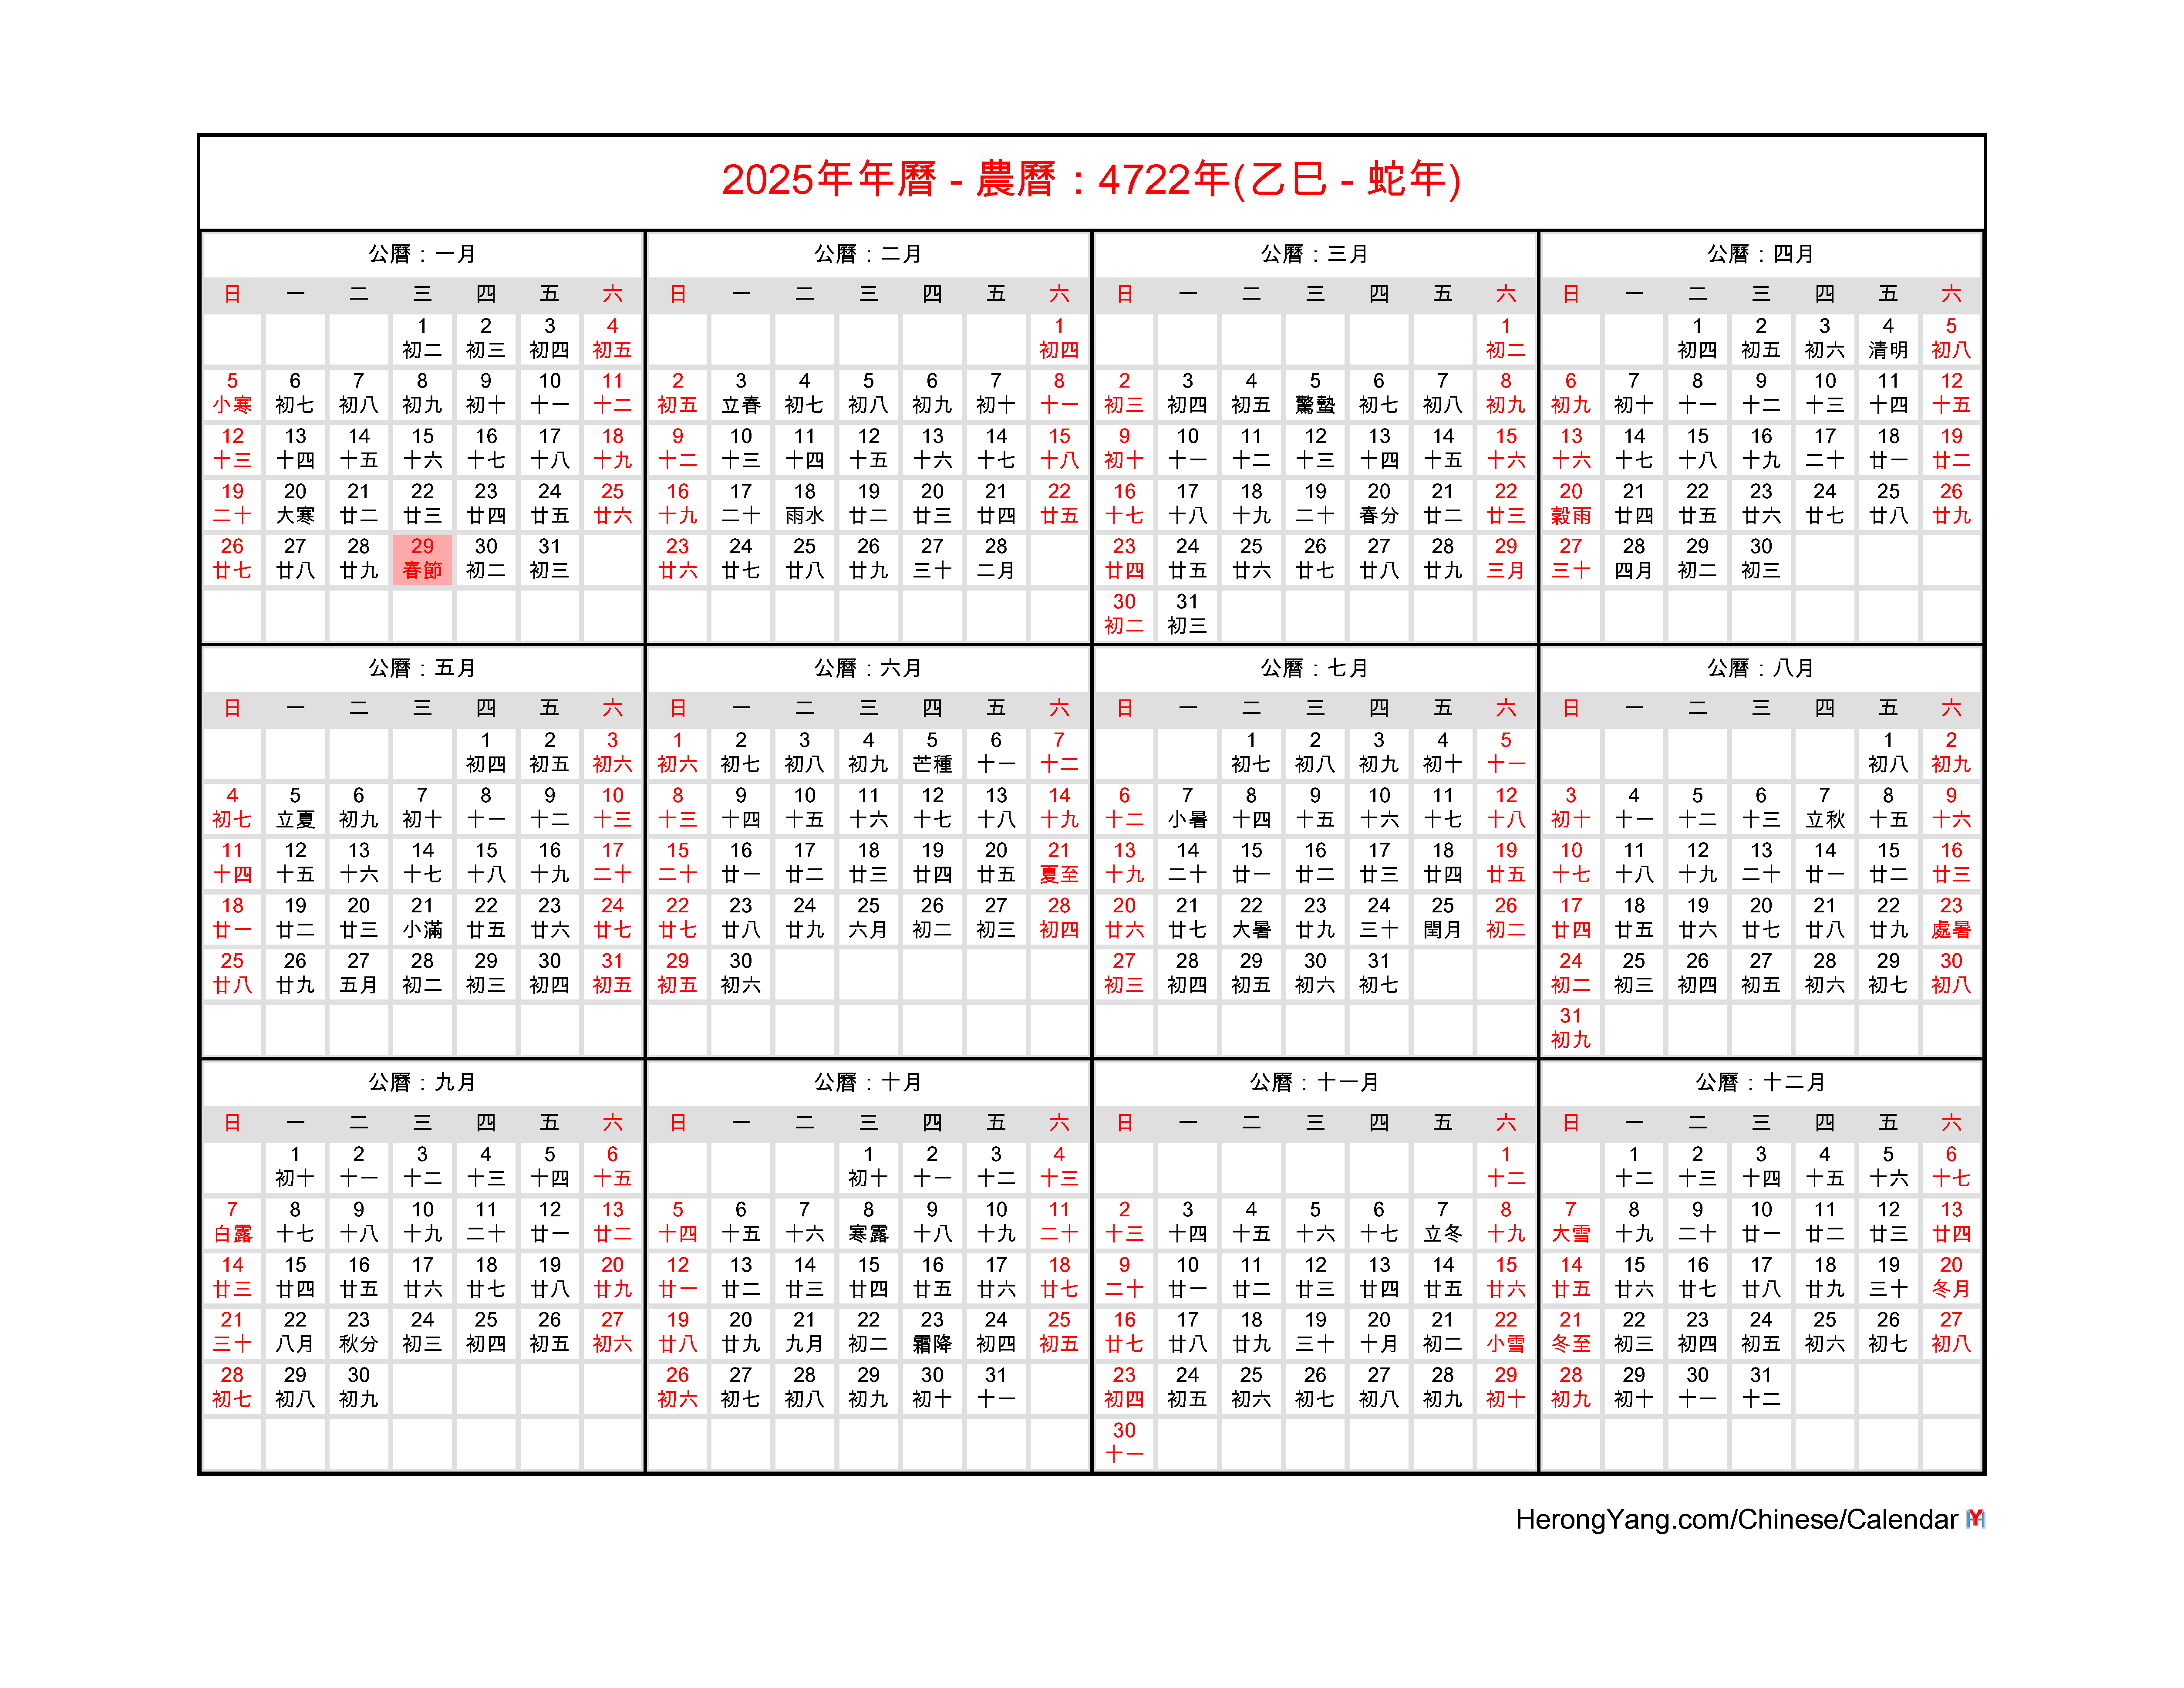 Free Chinese Calendar 2025 Year of the Snake